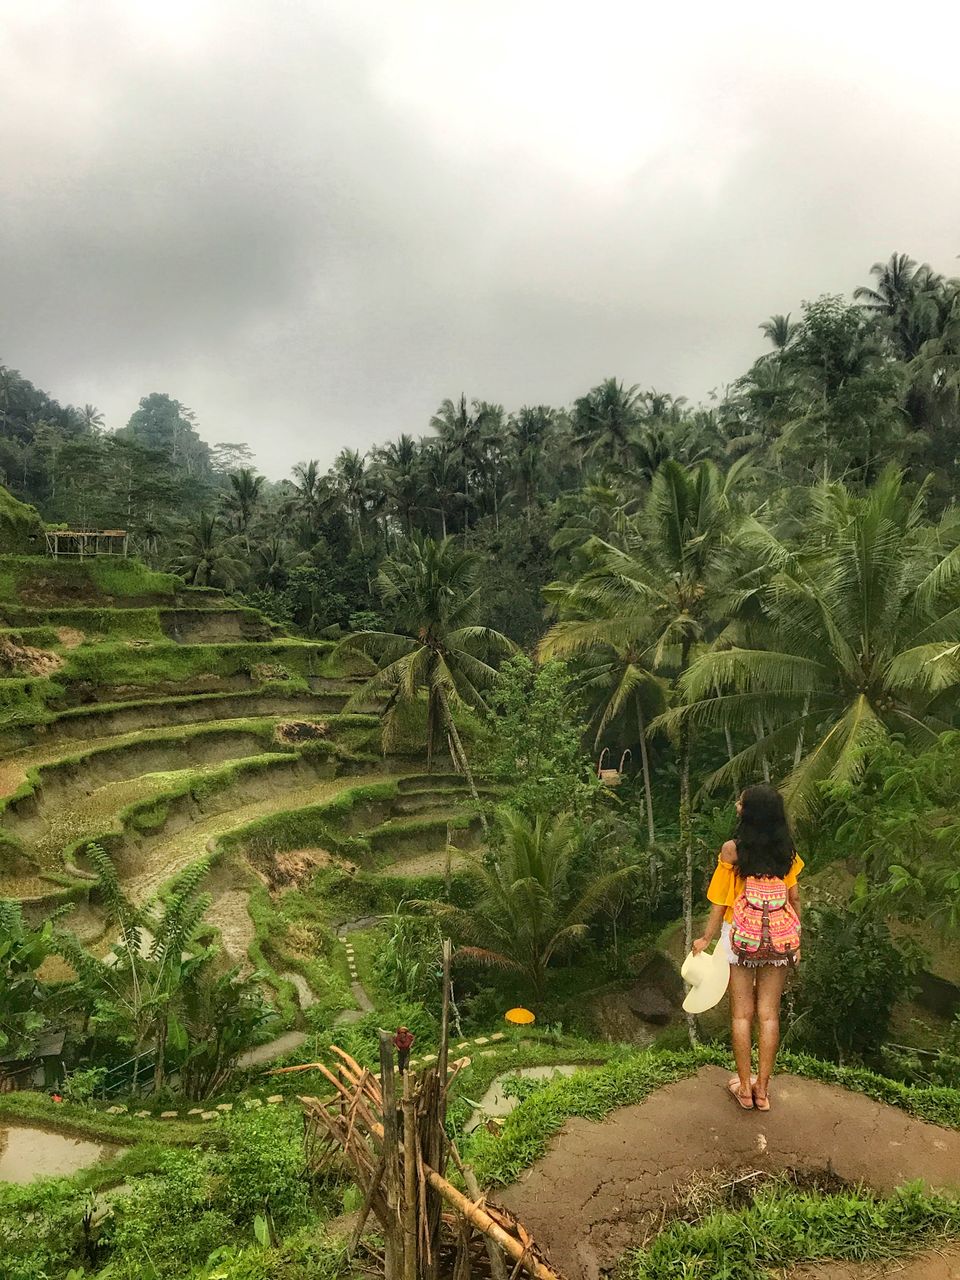 A countryside adventure: Cycling beyond the Bali everyone knows - Tripoto